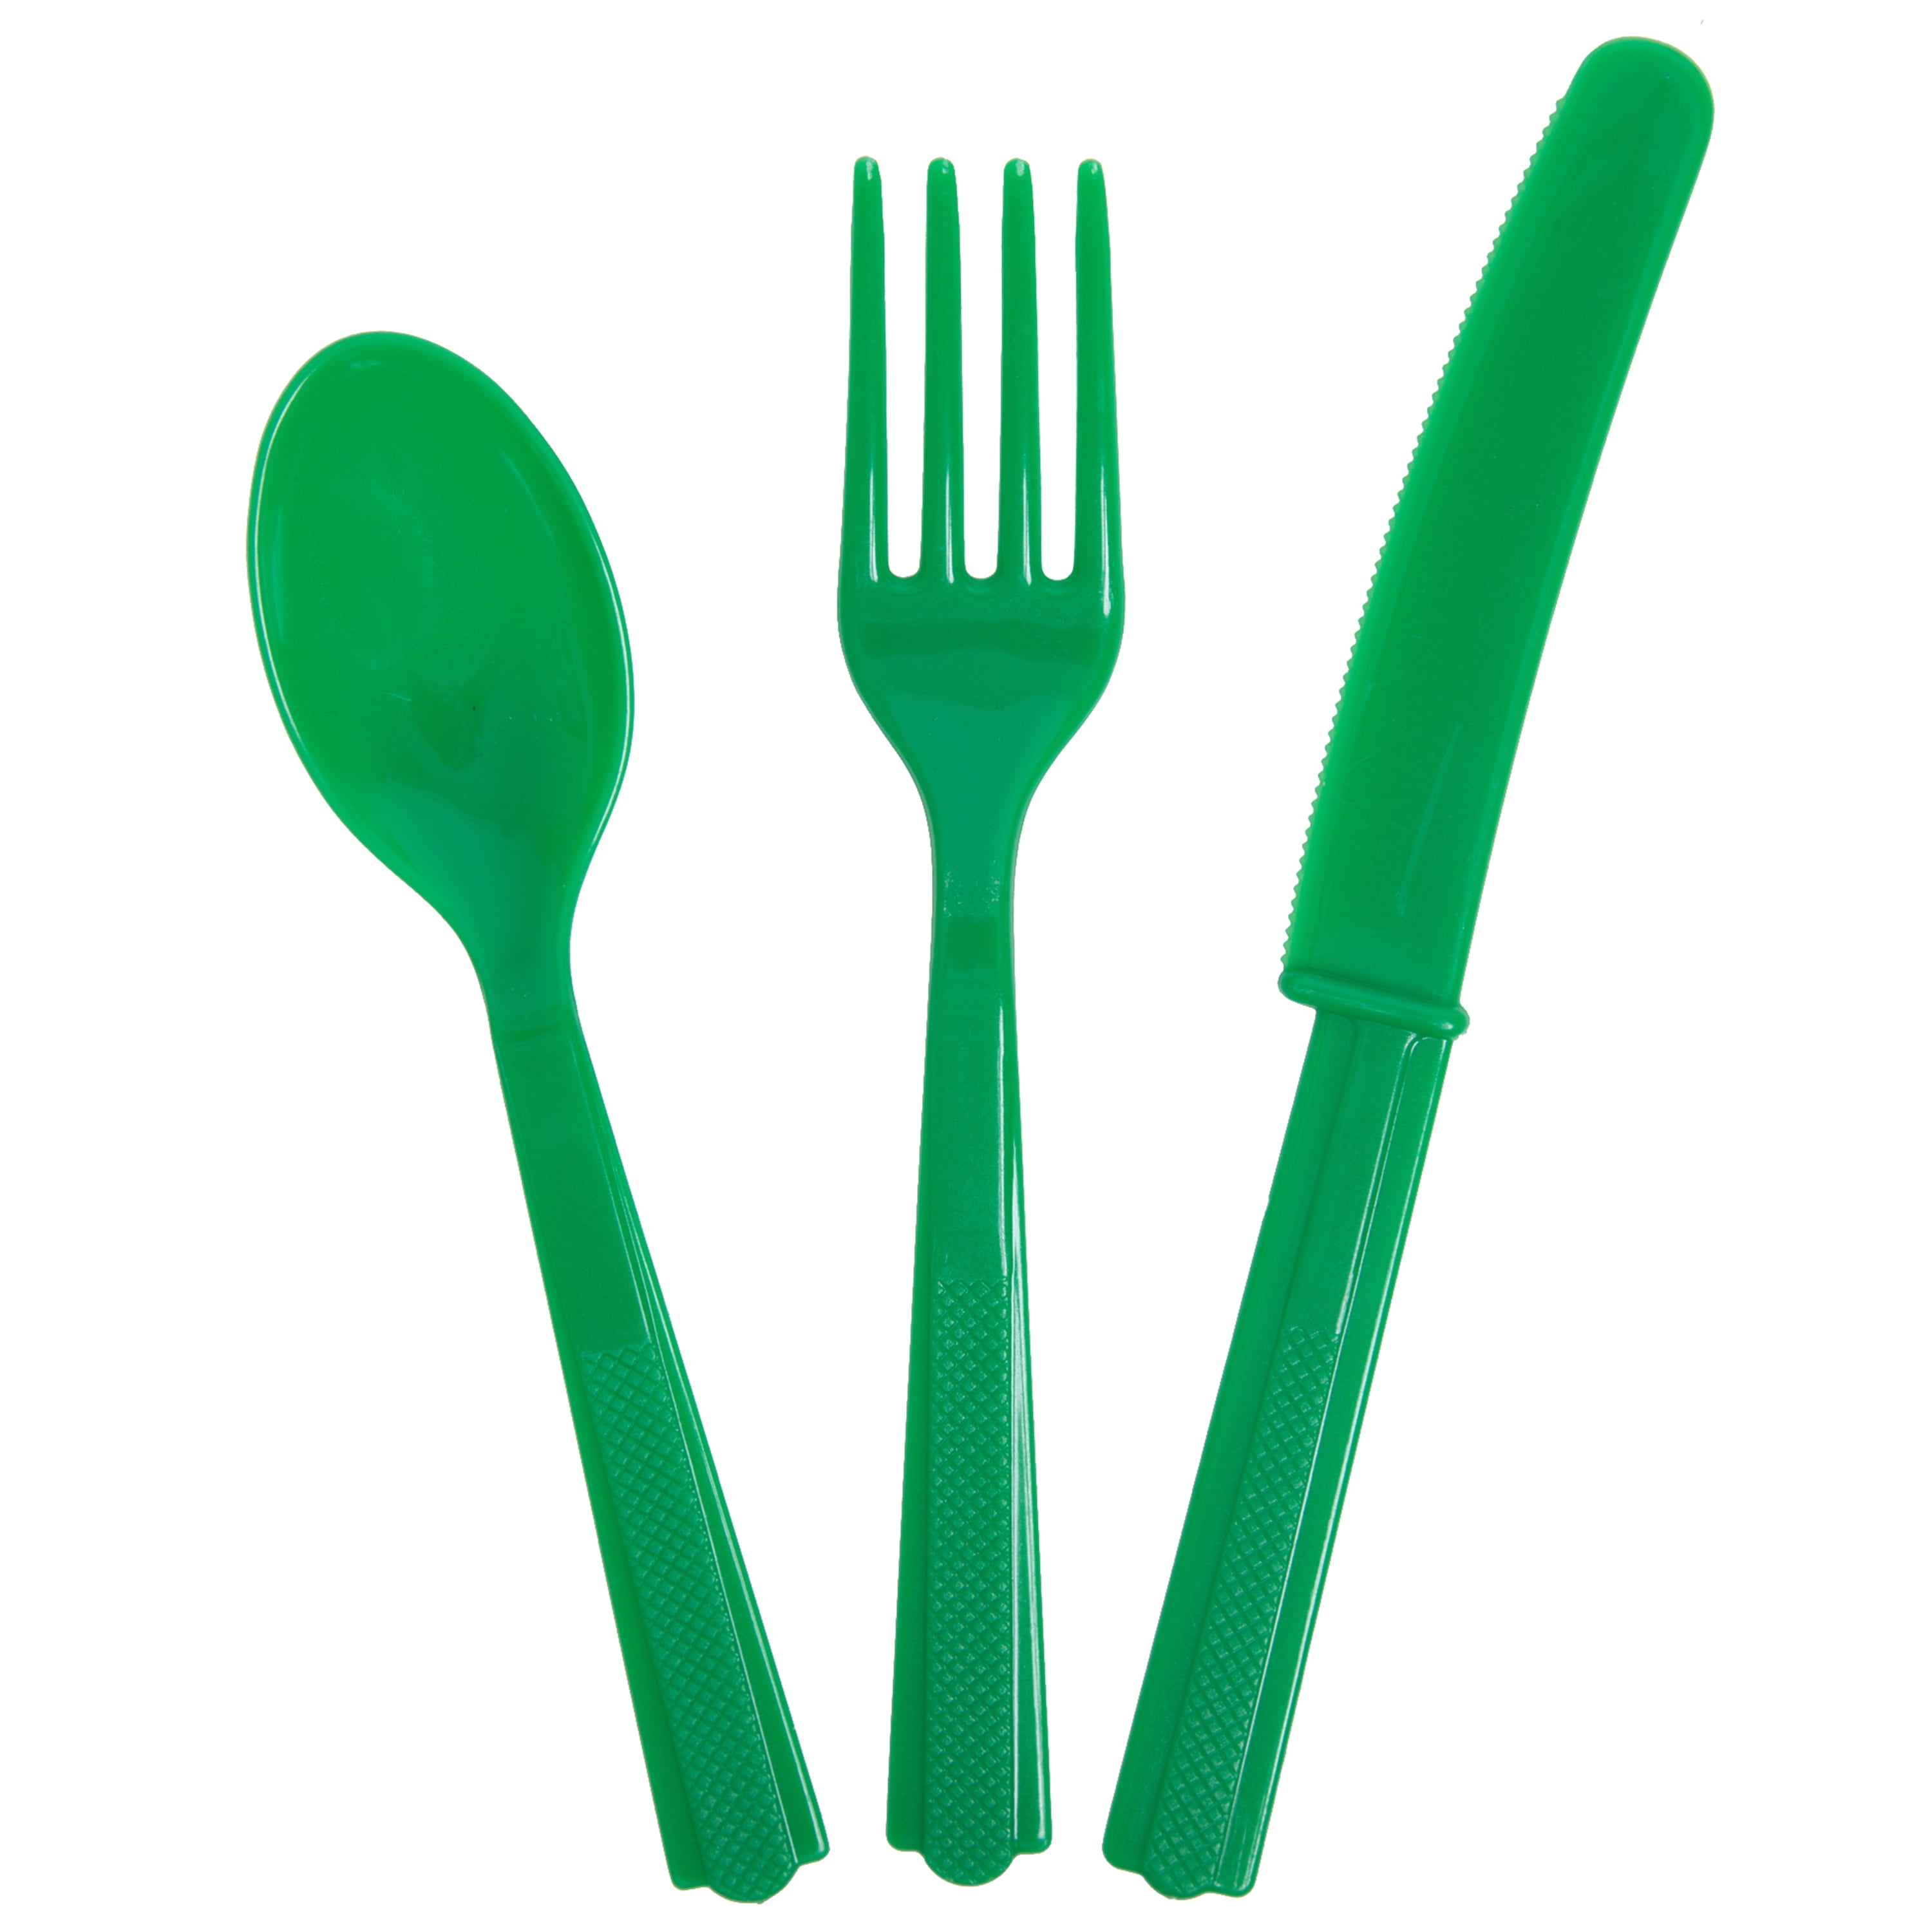 Basicwise Green Reusable Cutlery Set of 4 Plastic Plates, Spoons, Forks and Knives for Baby and Toddlers